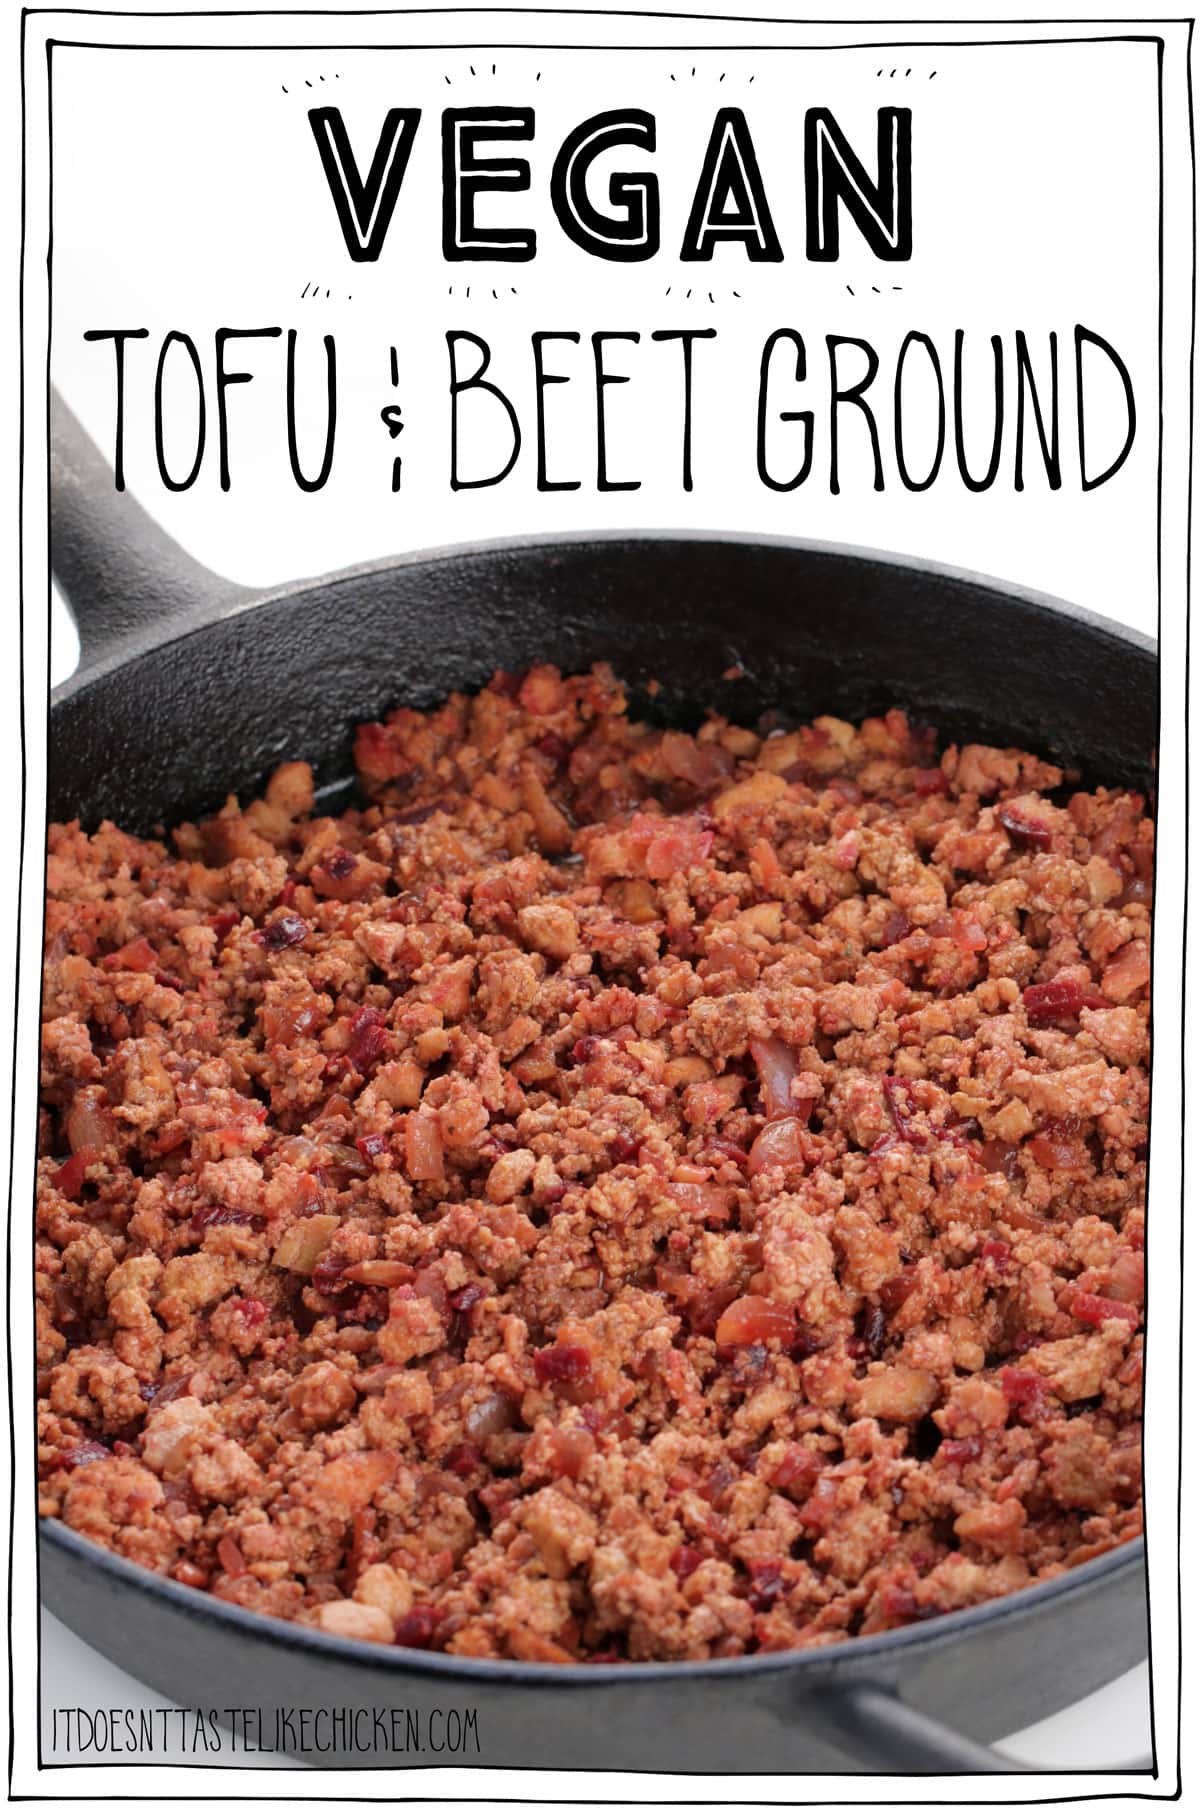 Vegan Tofu & Beet Ground (vegan ground beef)! This veggie ground is made with just a few simple ingredients that make for a chewy, juicy, meaty, totally vegan bite. Flavourful, but only lightly seasoned so you can use it anywhere where you would have used ground beef. Lasagna, pasta, burritos, tacos, sloppy joes, nachos, soups, shepherds pie... the options are endless! Make ahead of time, and store in the fridge or freezer for later so you have it on hand. #itdoesnttastelikechicken #veganrecipes